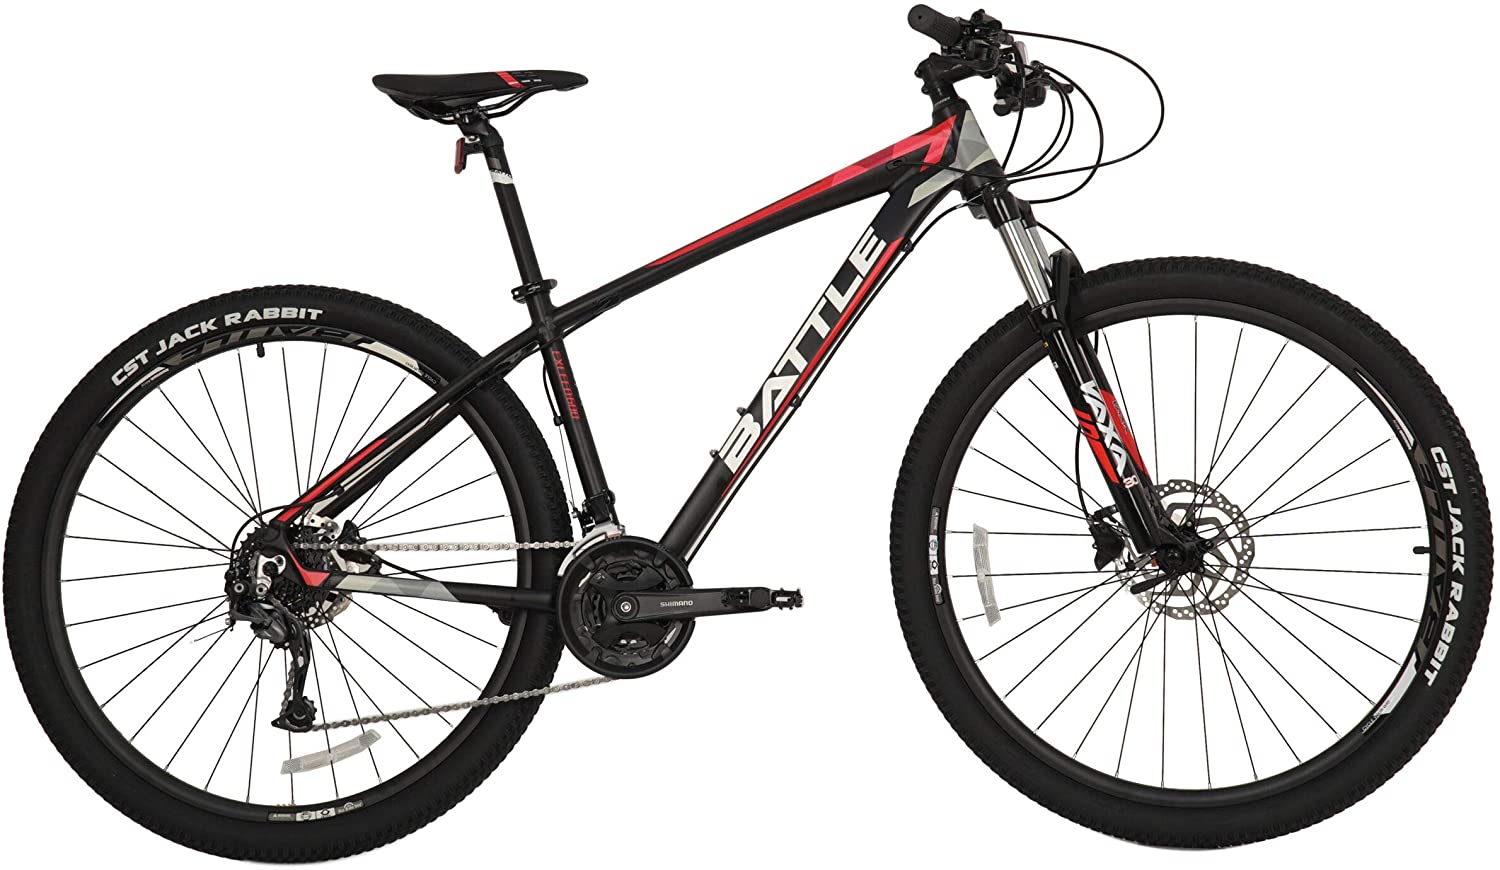 Battle Exceed 600 MTB 29 Inch Bicycle (BLACK) 100% assembled.